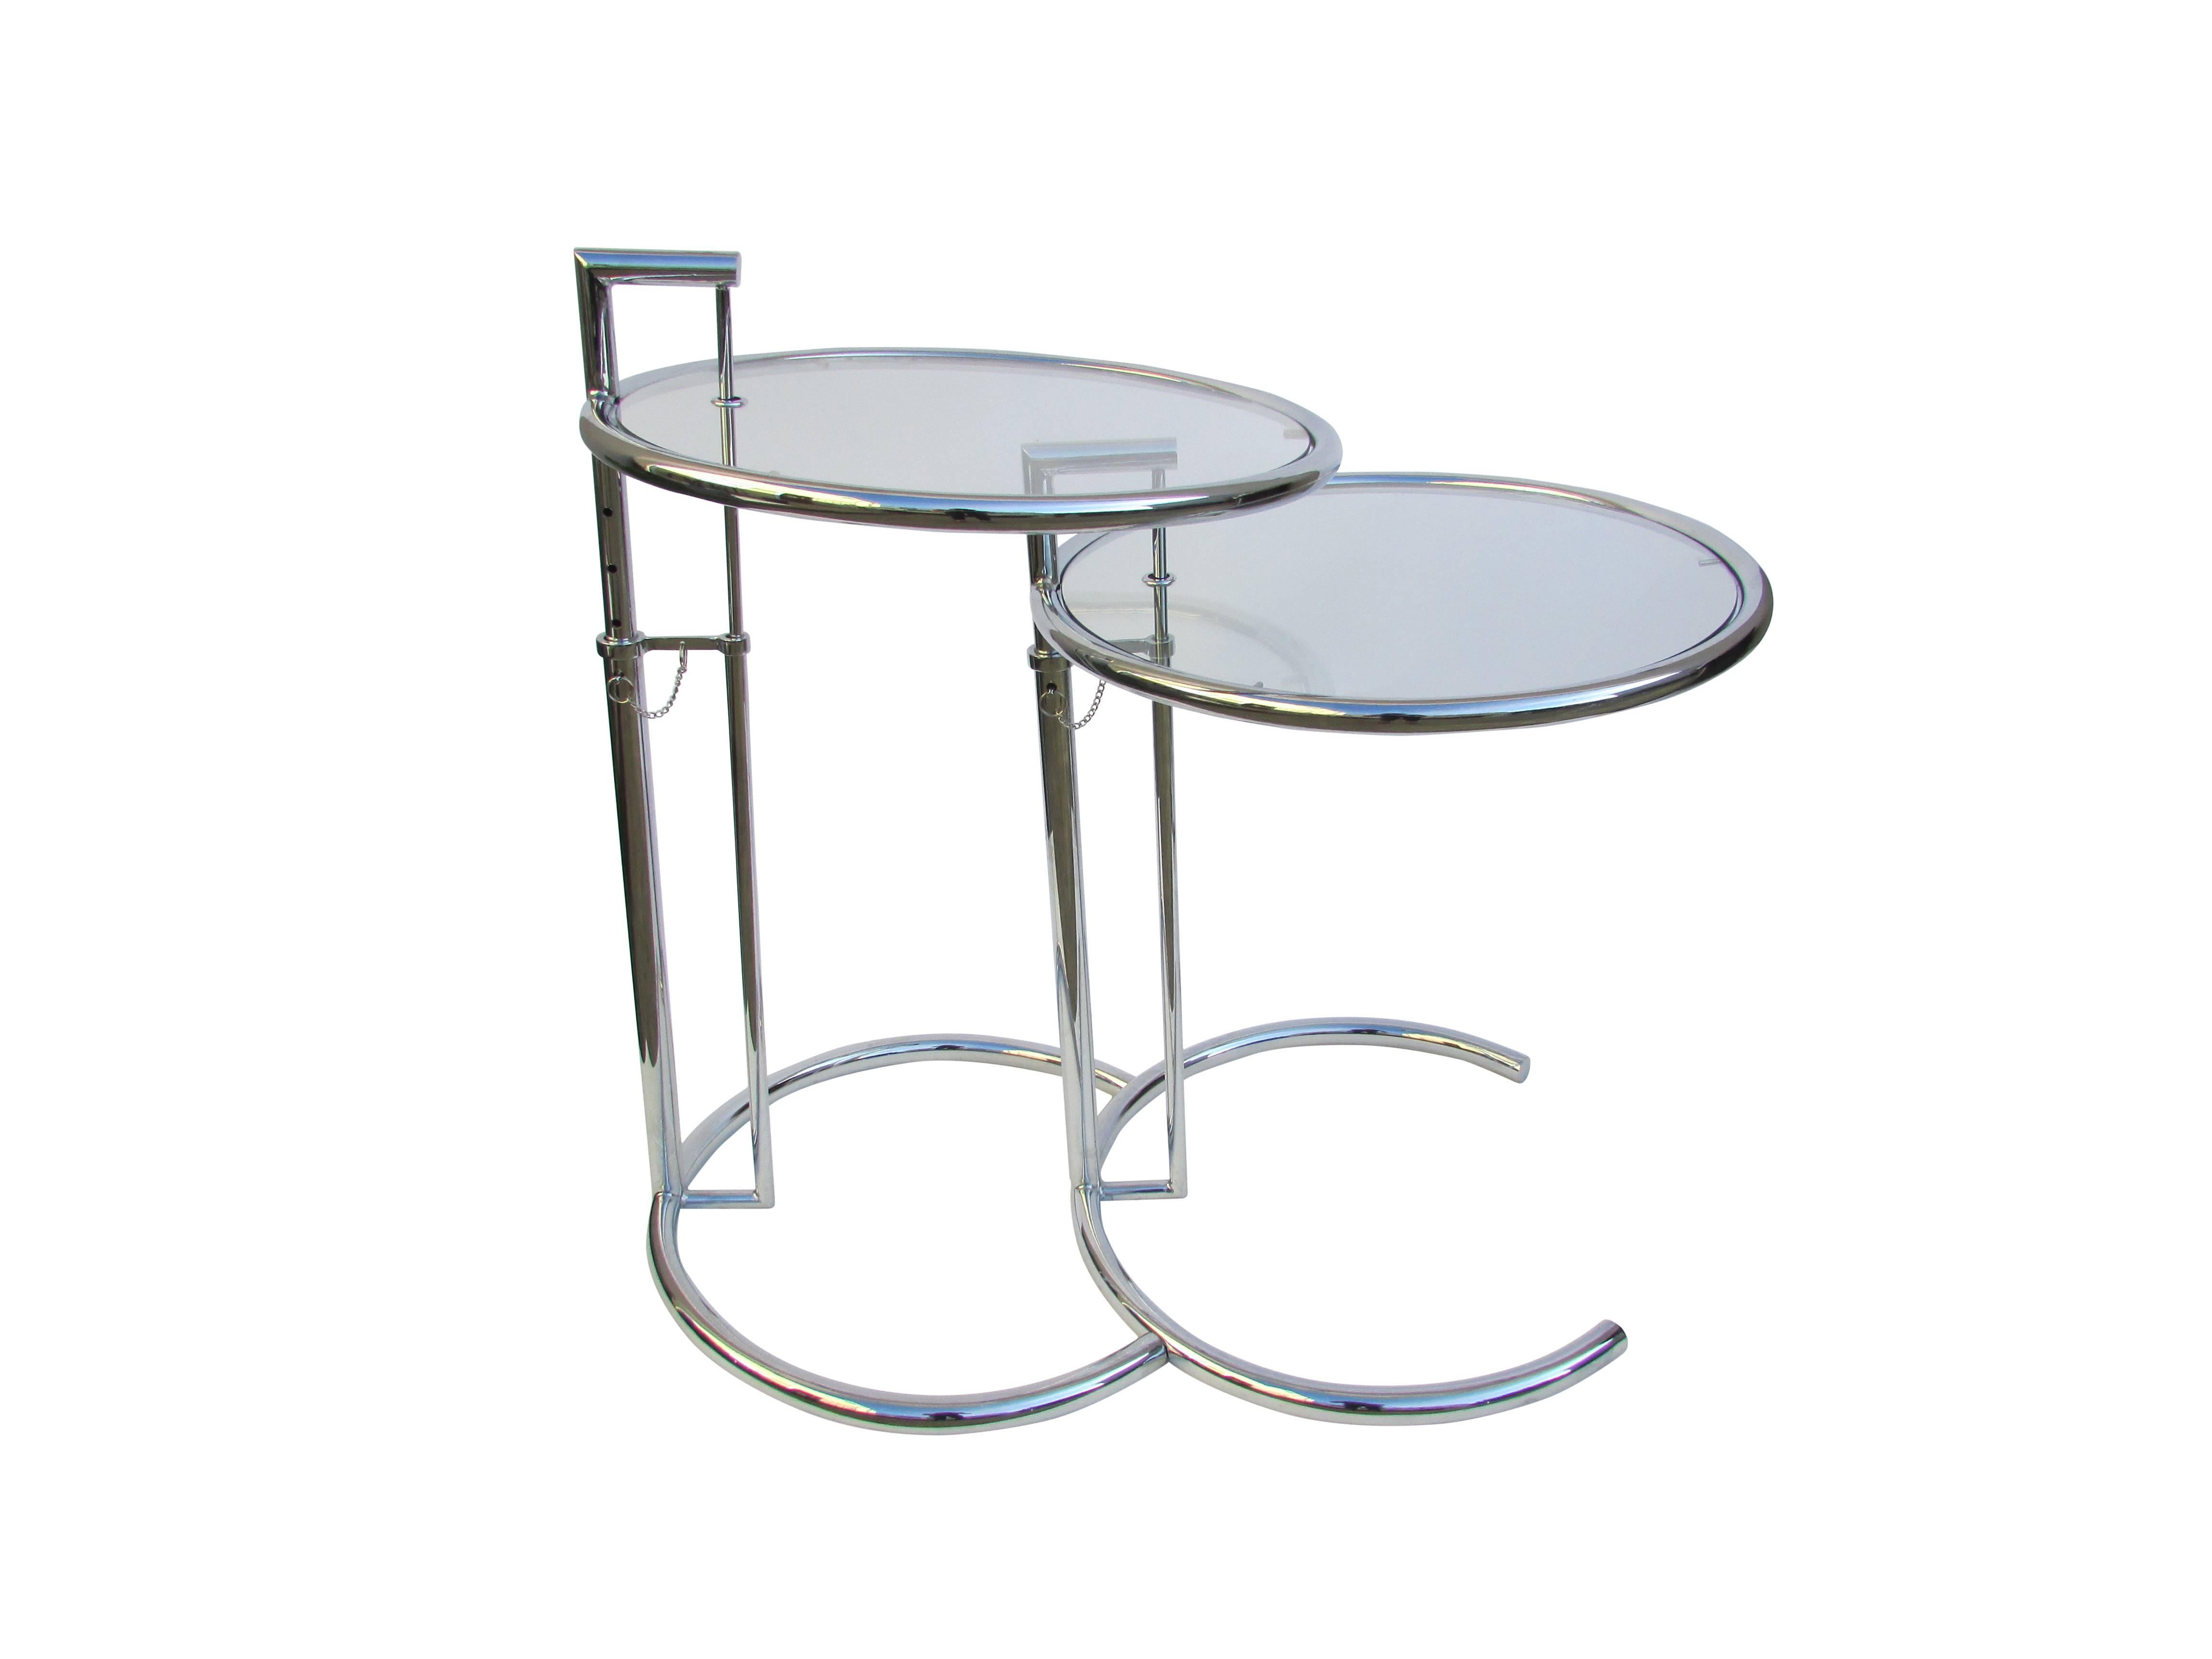 Pair of Adjustable Chrome and Glass Side Tables